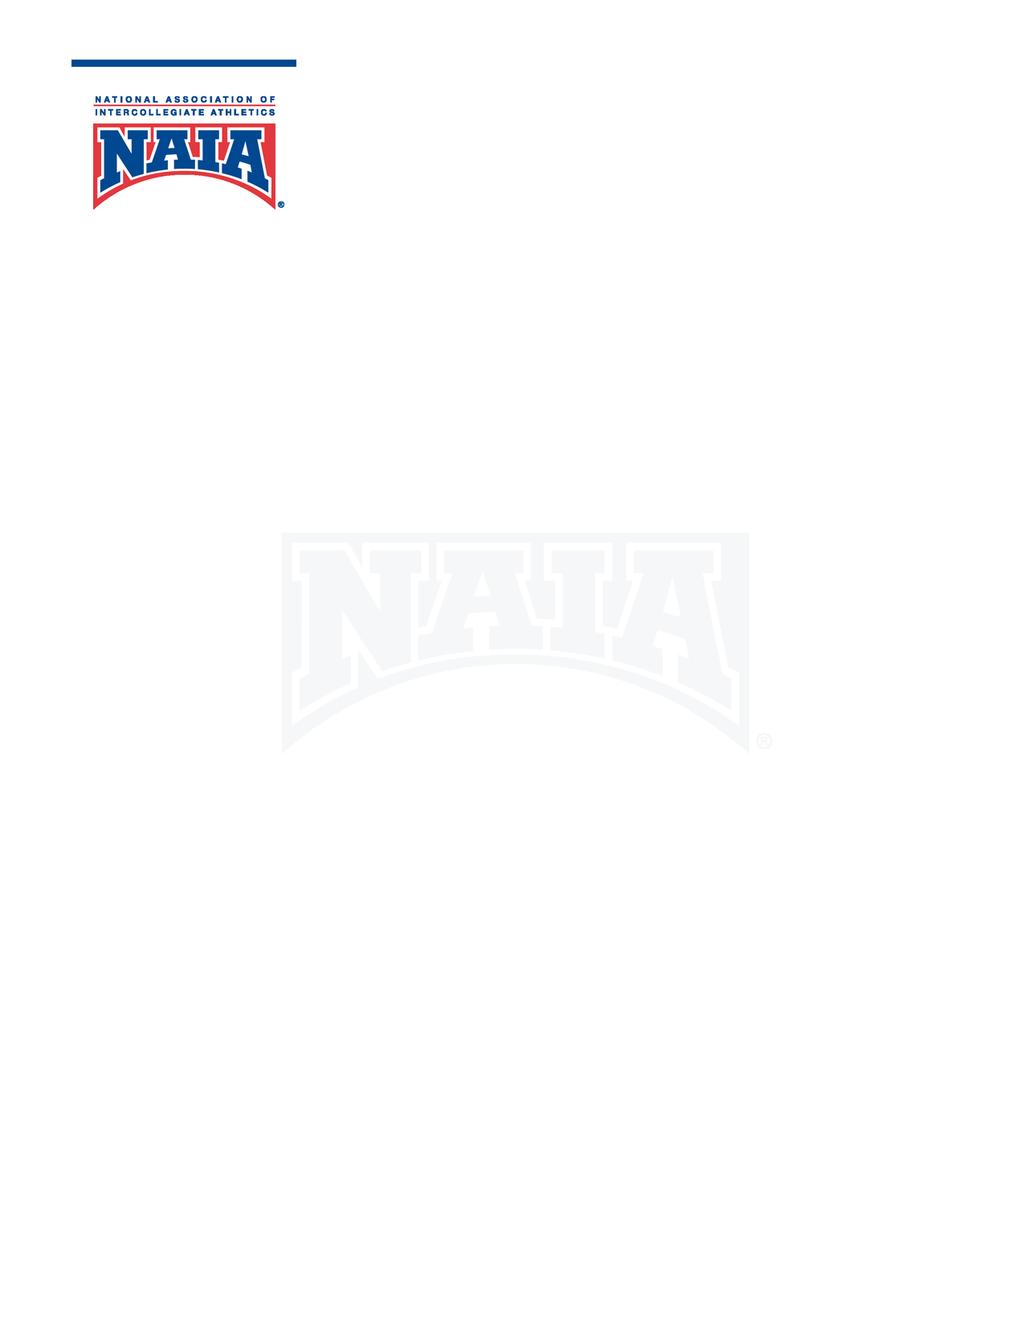 NAIA Conduct in Competition Suspension Rubric In the NAIA, any ejection in any sport carries a mandatory suspension of at least one game (see NAIA Bylaws Article VI, Section B, Item 7).